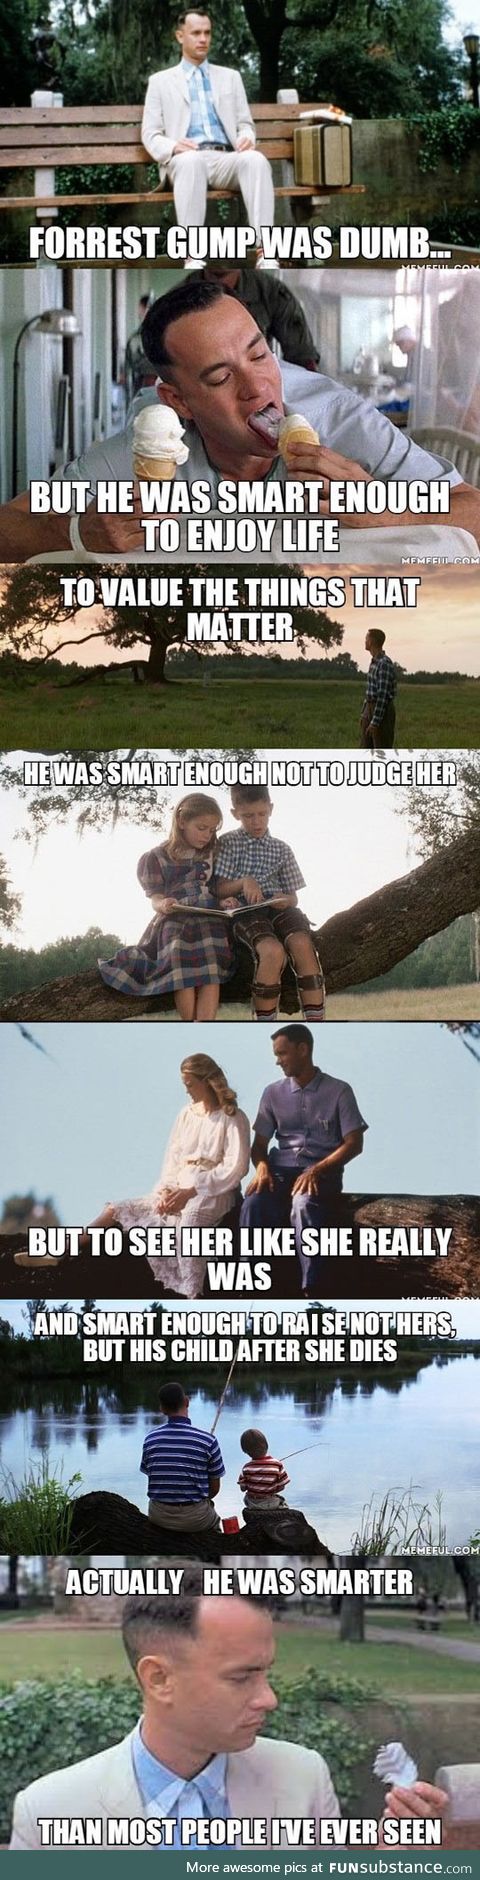 Forrest Gump Wasn’t Just The Story Of A Dumb Guy